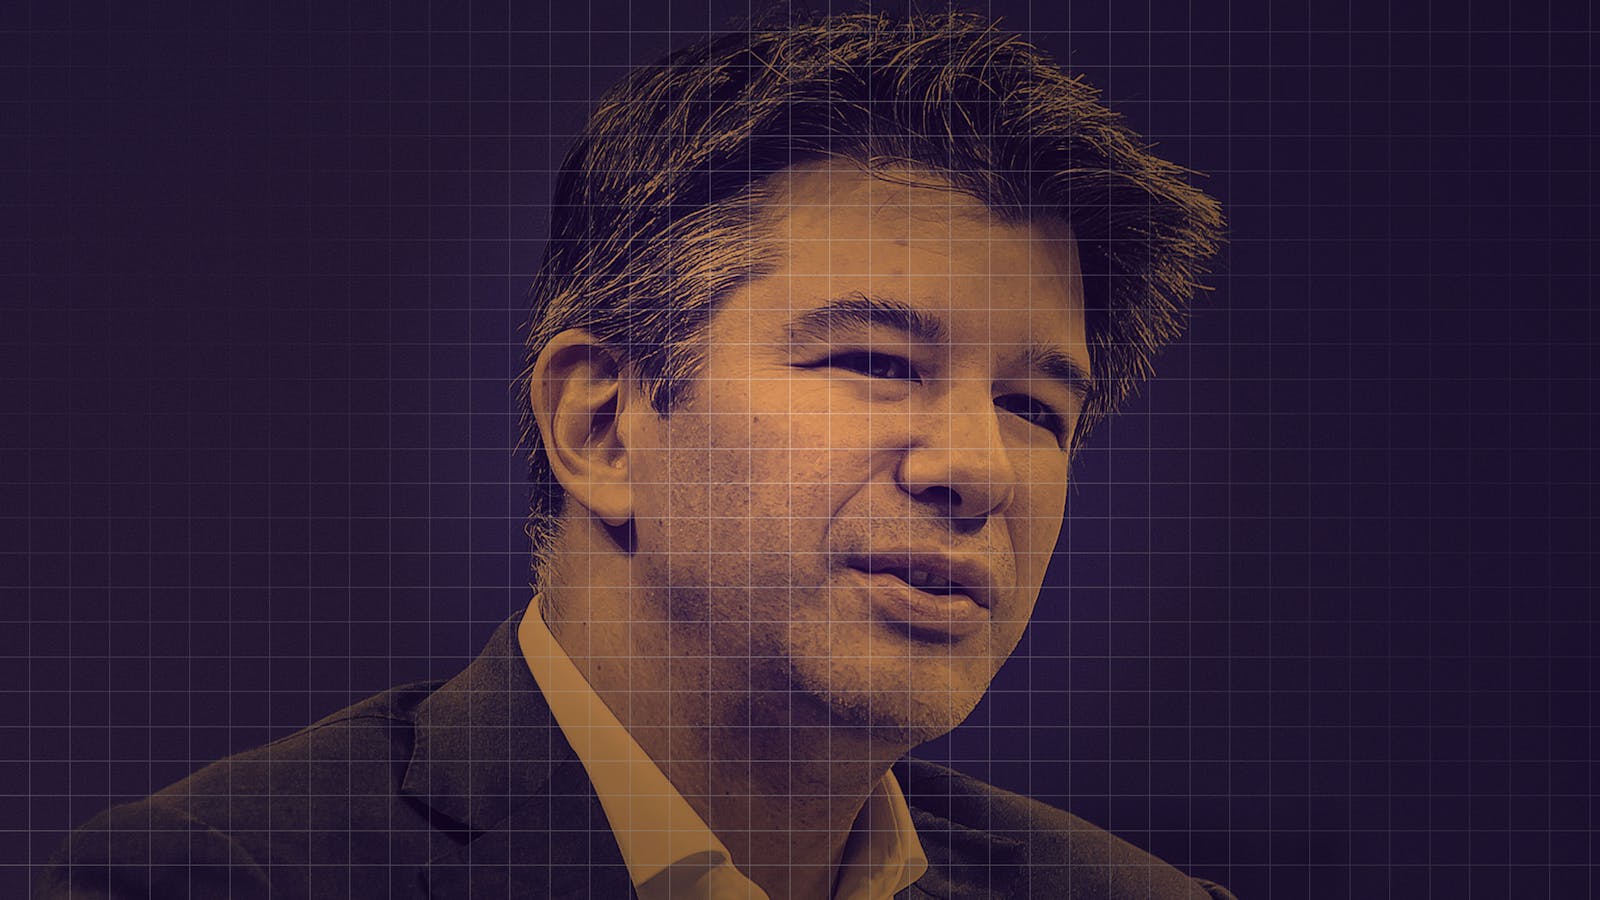 Where Is Ousted Uber CEO Travis Kalanick Now? - Career, Net Worth